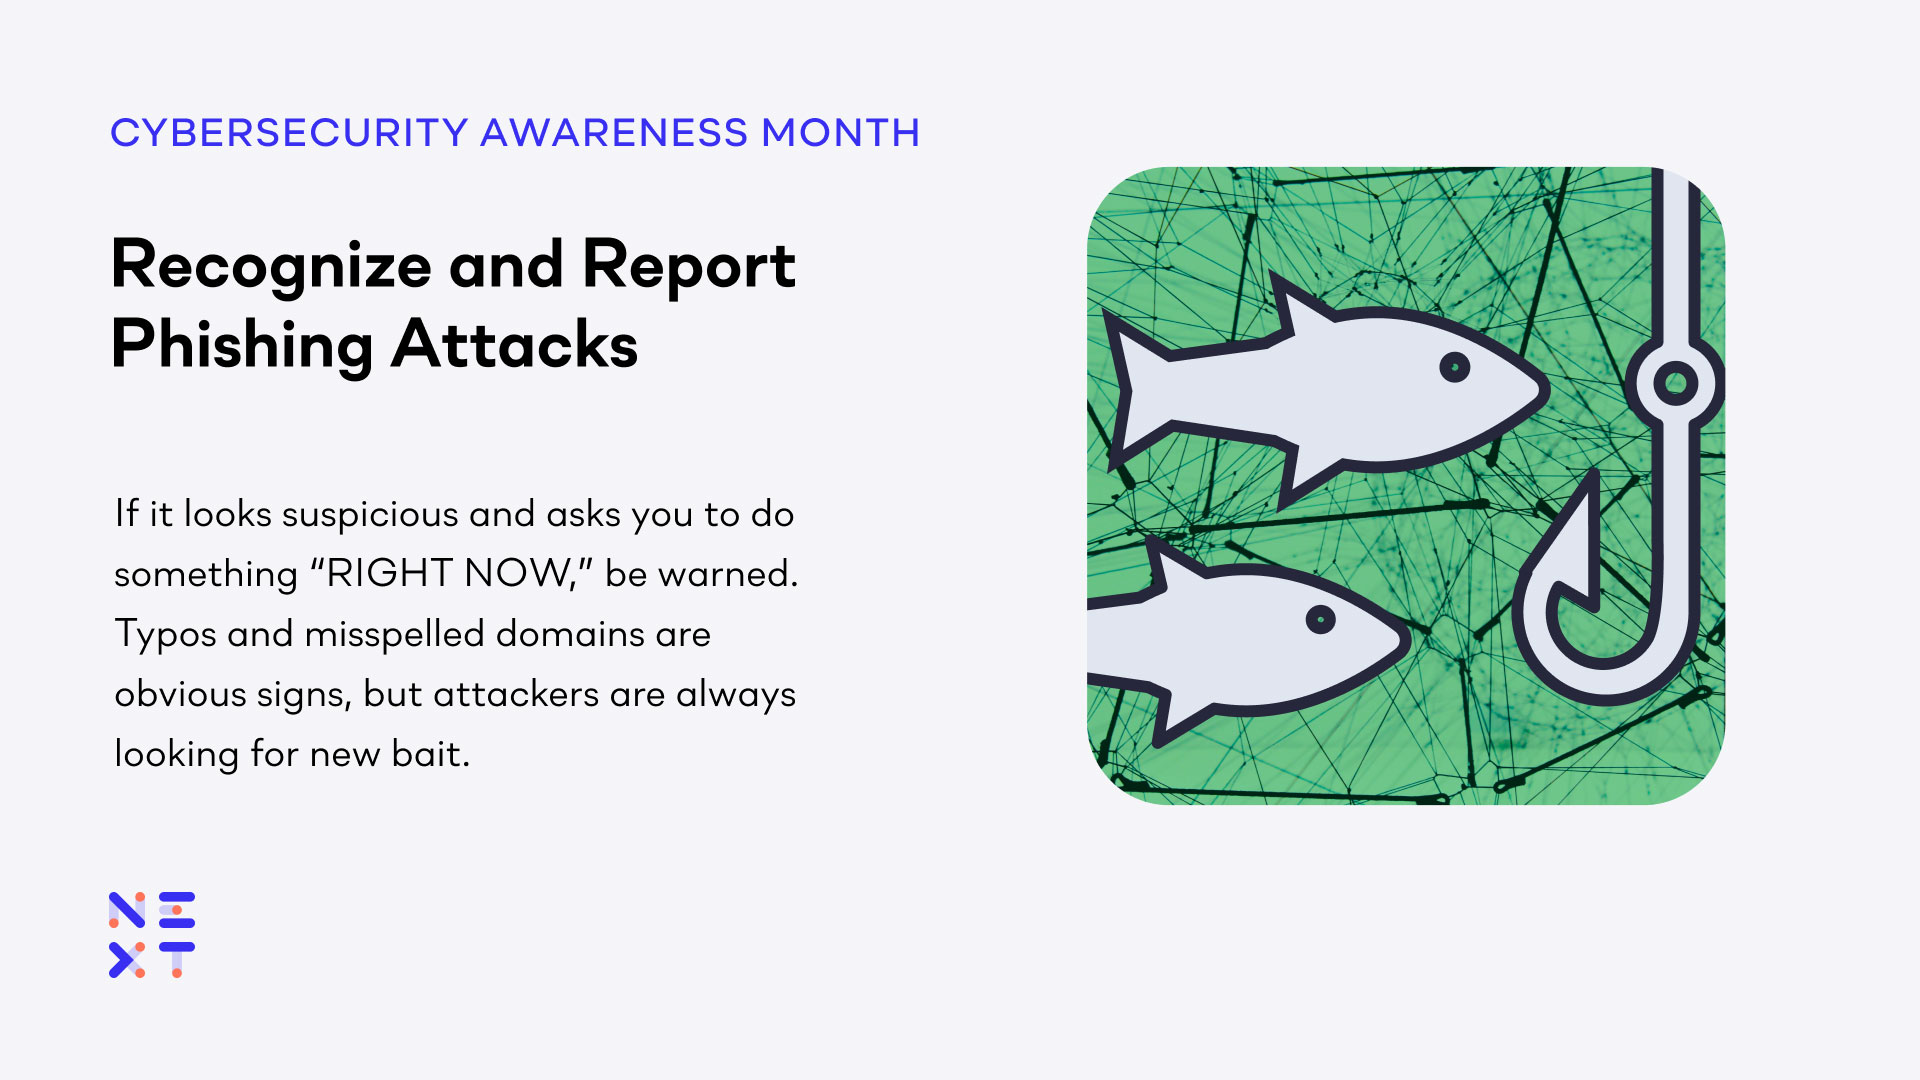 Spot Phishing Attempts  - Cybersecurity Awareness Month